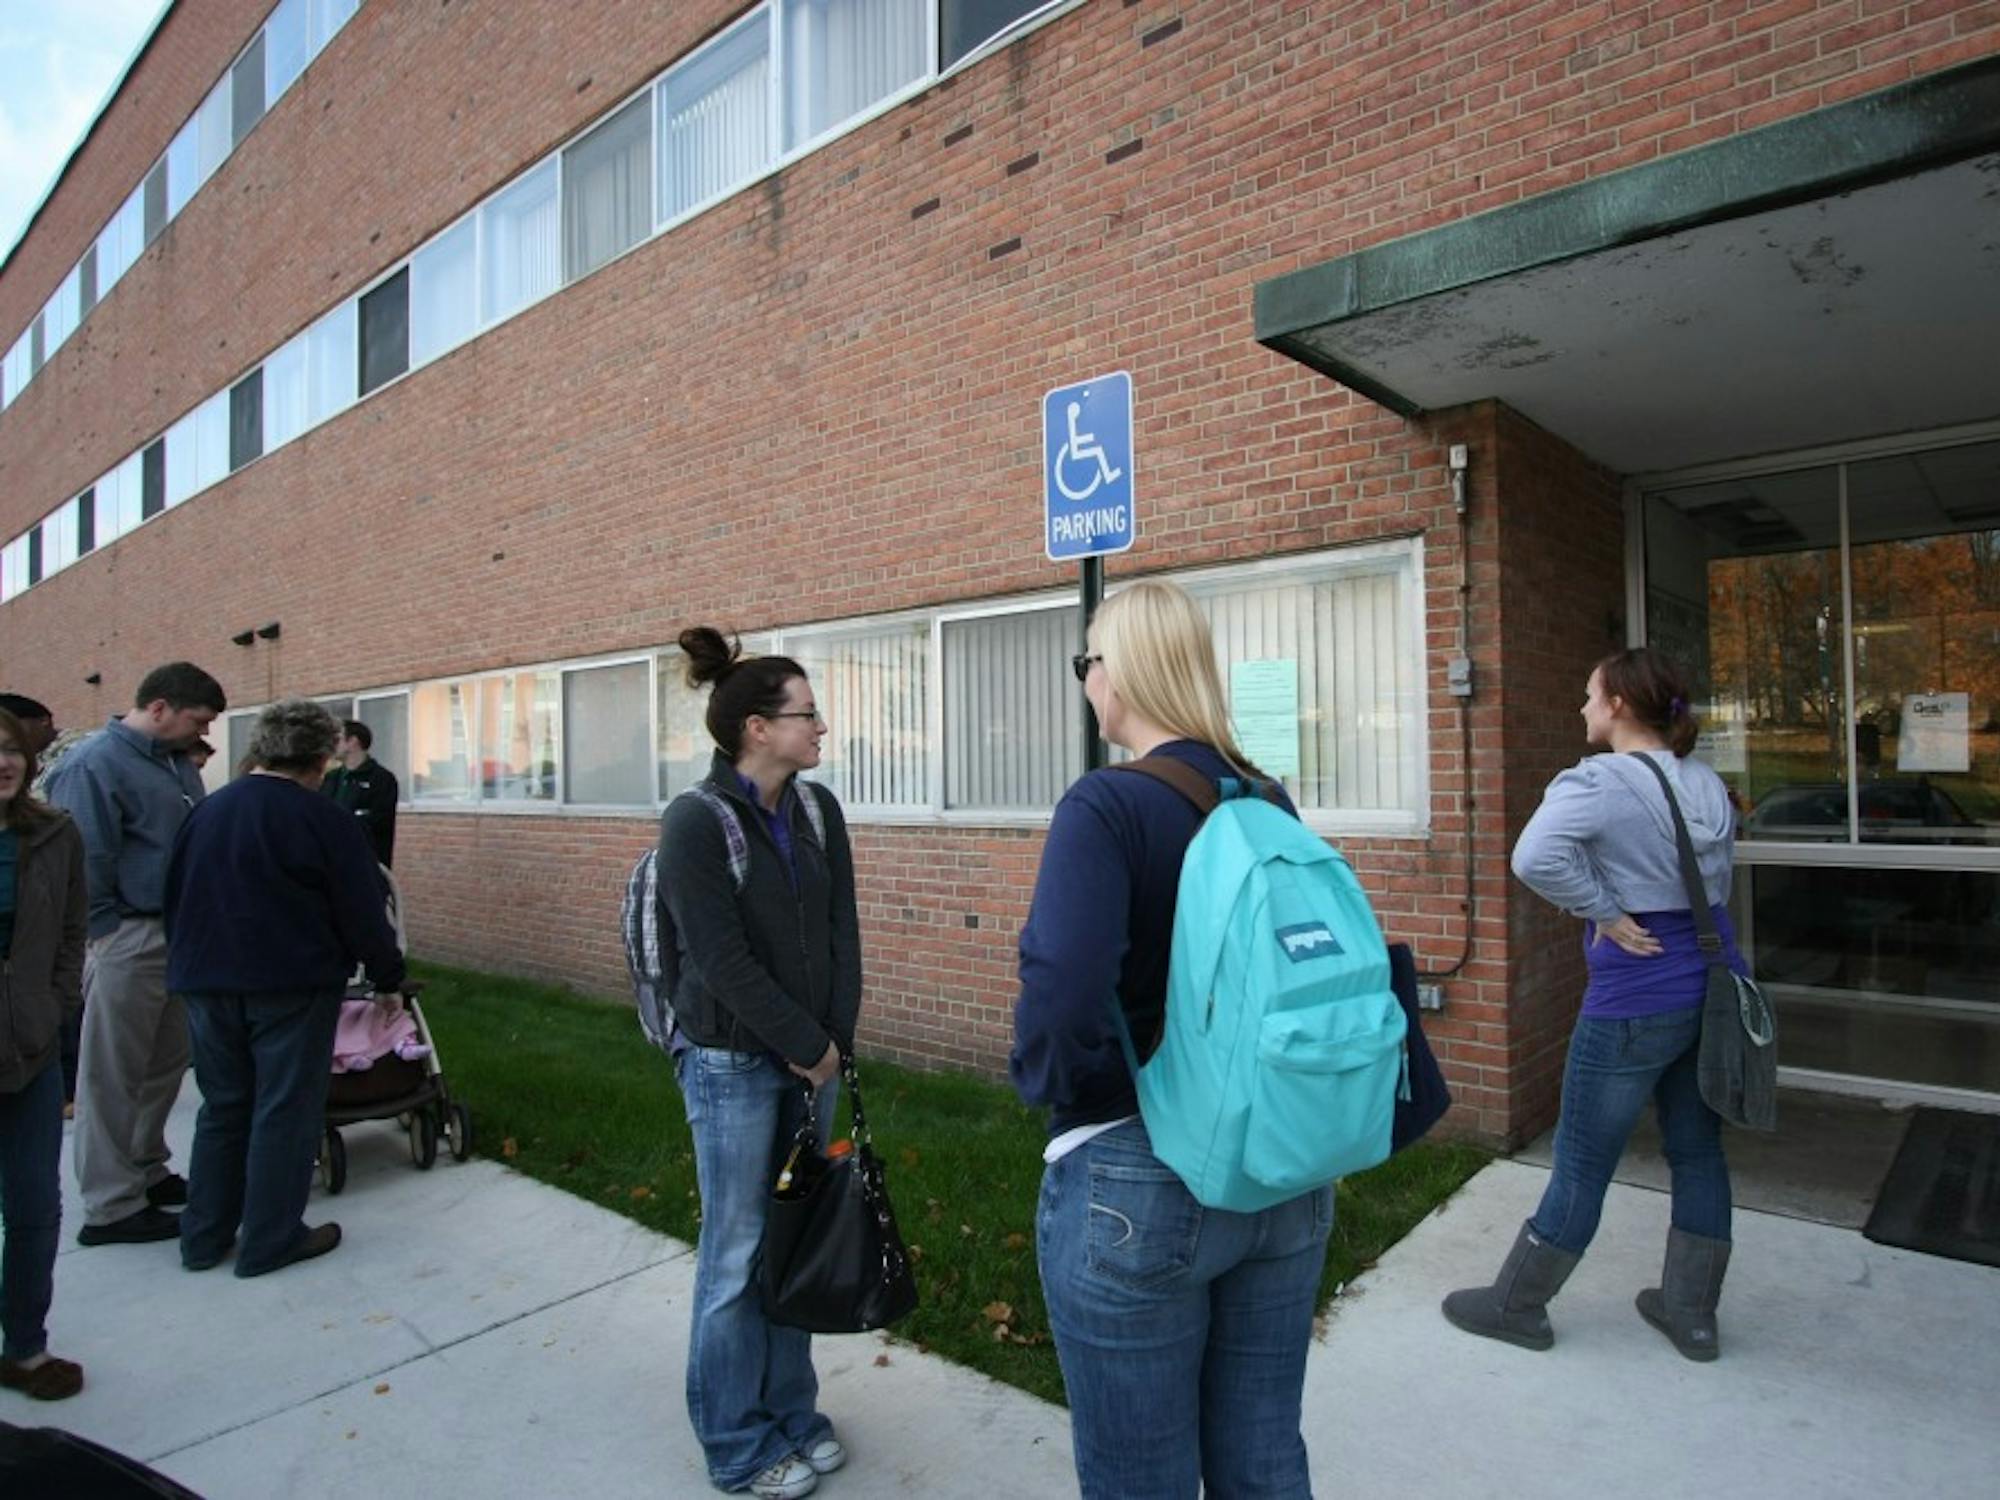 	Students and staff line up behind Show Health Center on Wenesday in order to recieve vaccinations in groups of fives. EMU is only offering vaccinations for those deemed high risk patients due to the shortage of vaccines available. High risk individuals include pregnant women, those with chronic pulmonary disorders, health care workers, EMS/first responders and those who care for or live with infants 